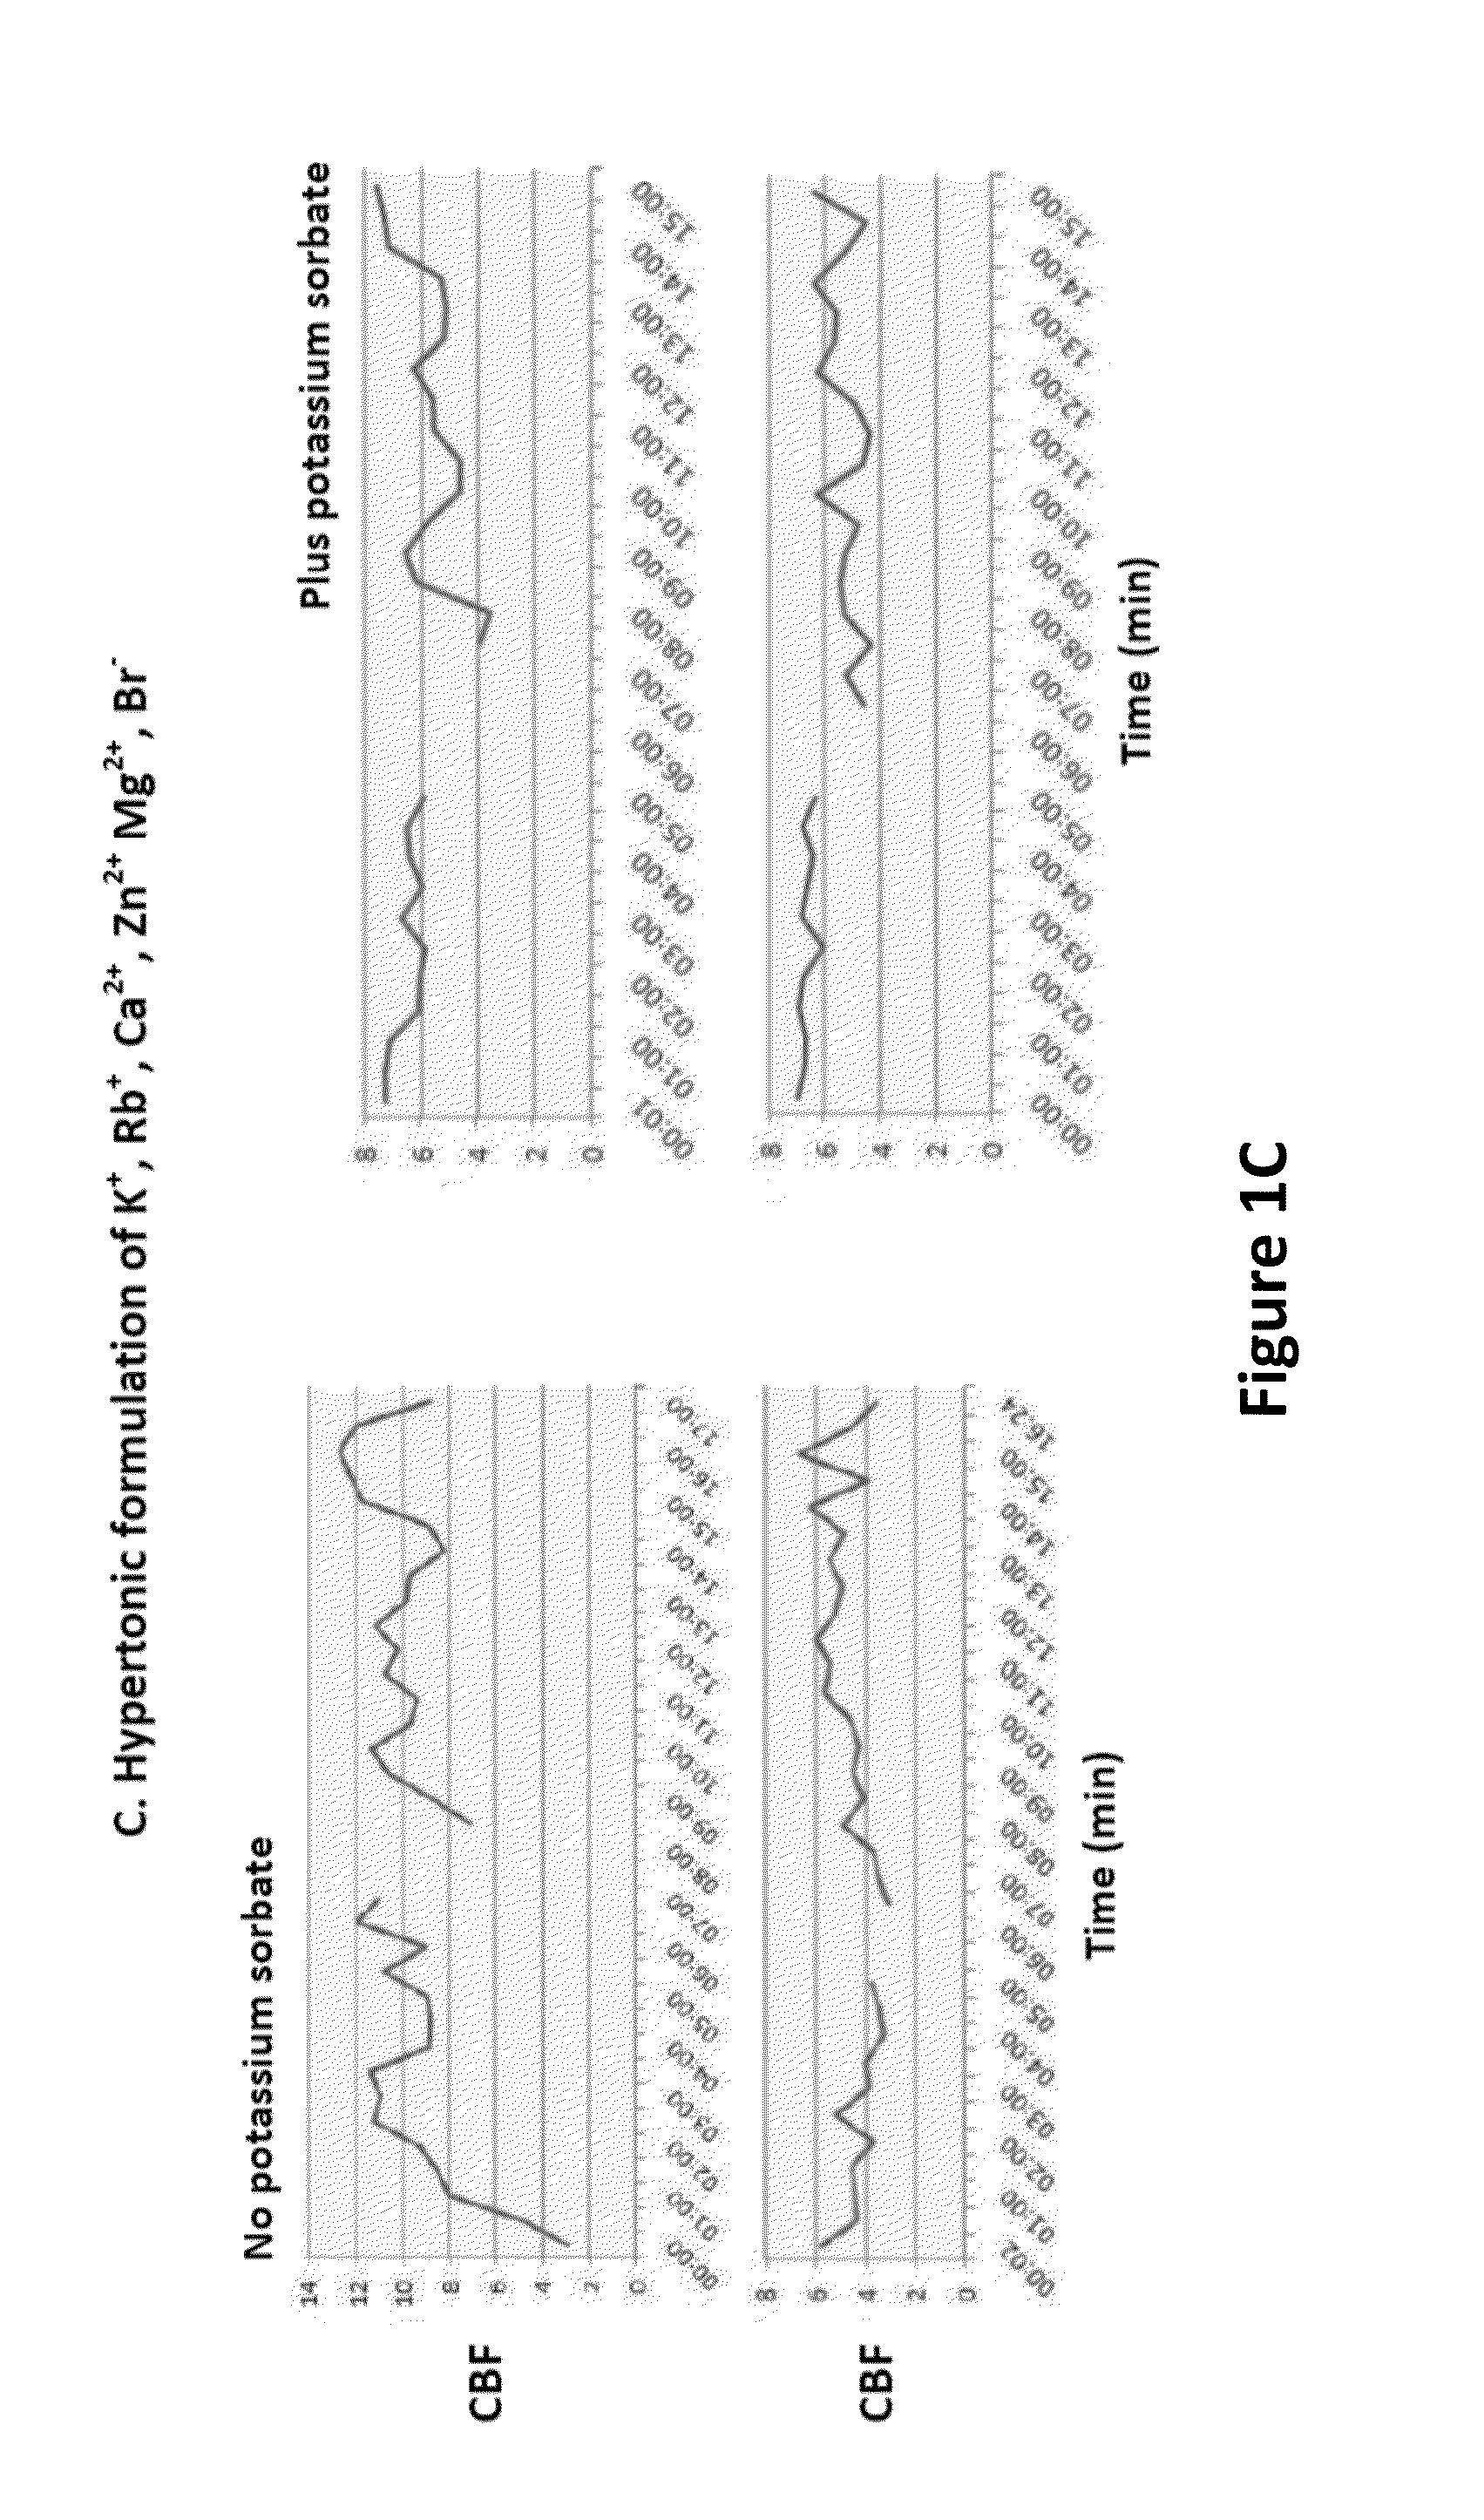 Compositions of enhancing wound healing containing magnesium and bromide